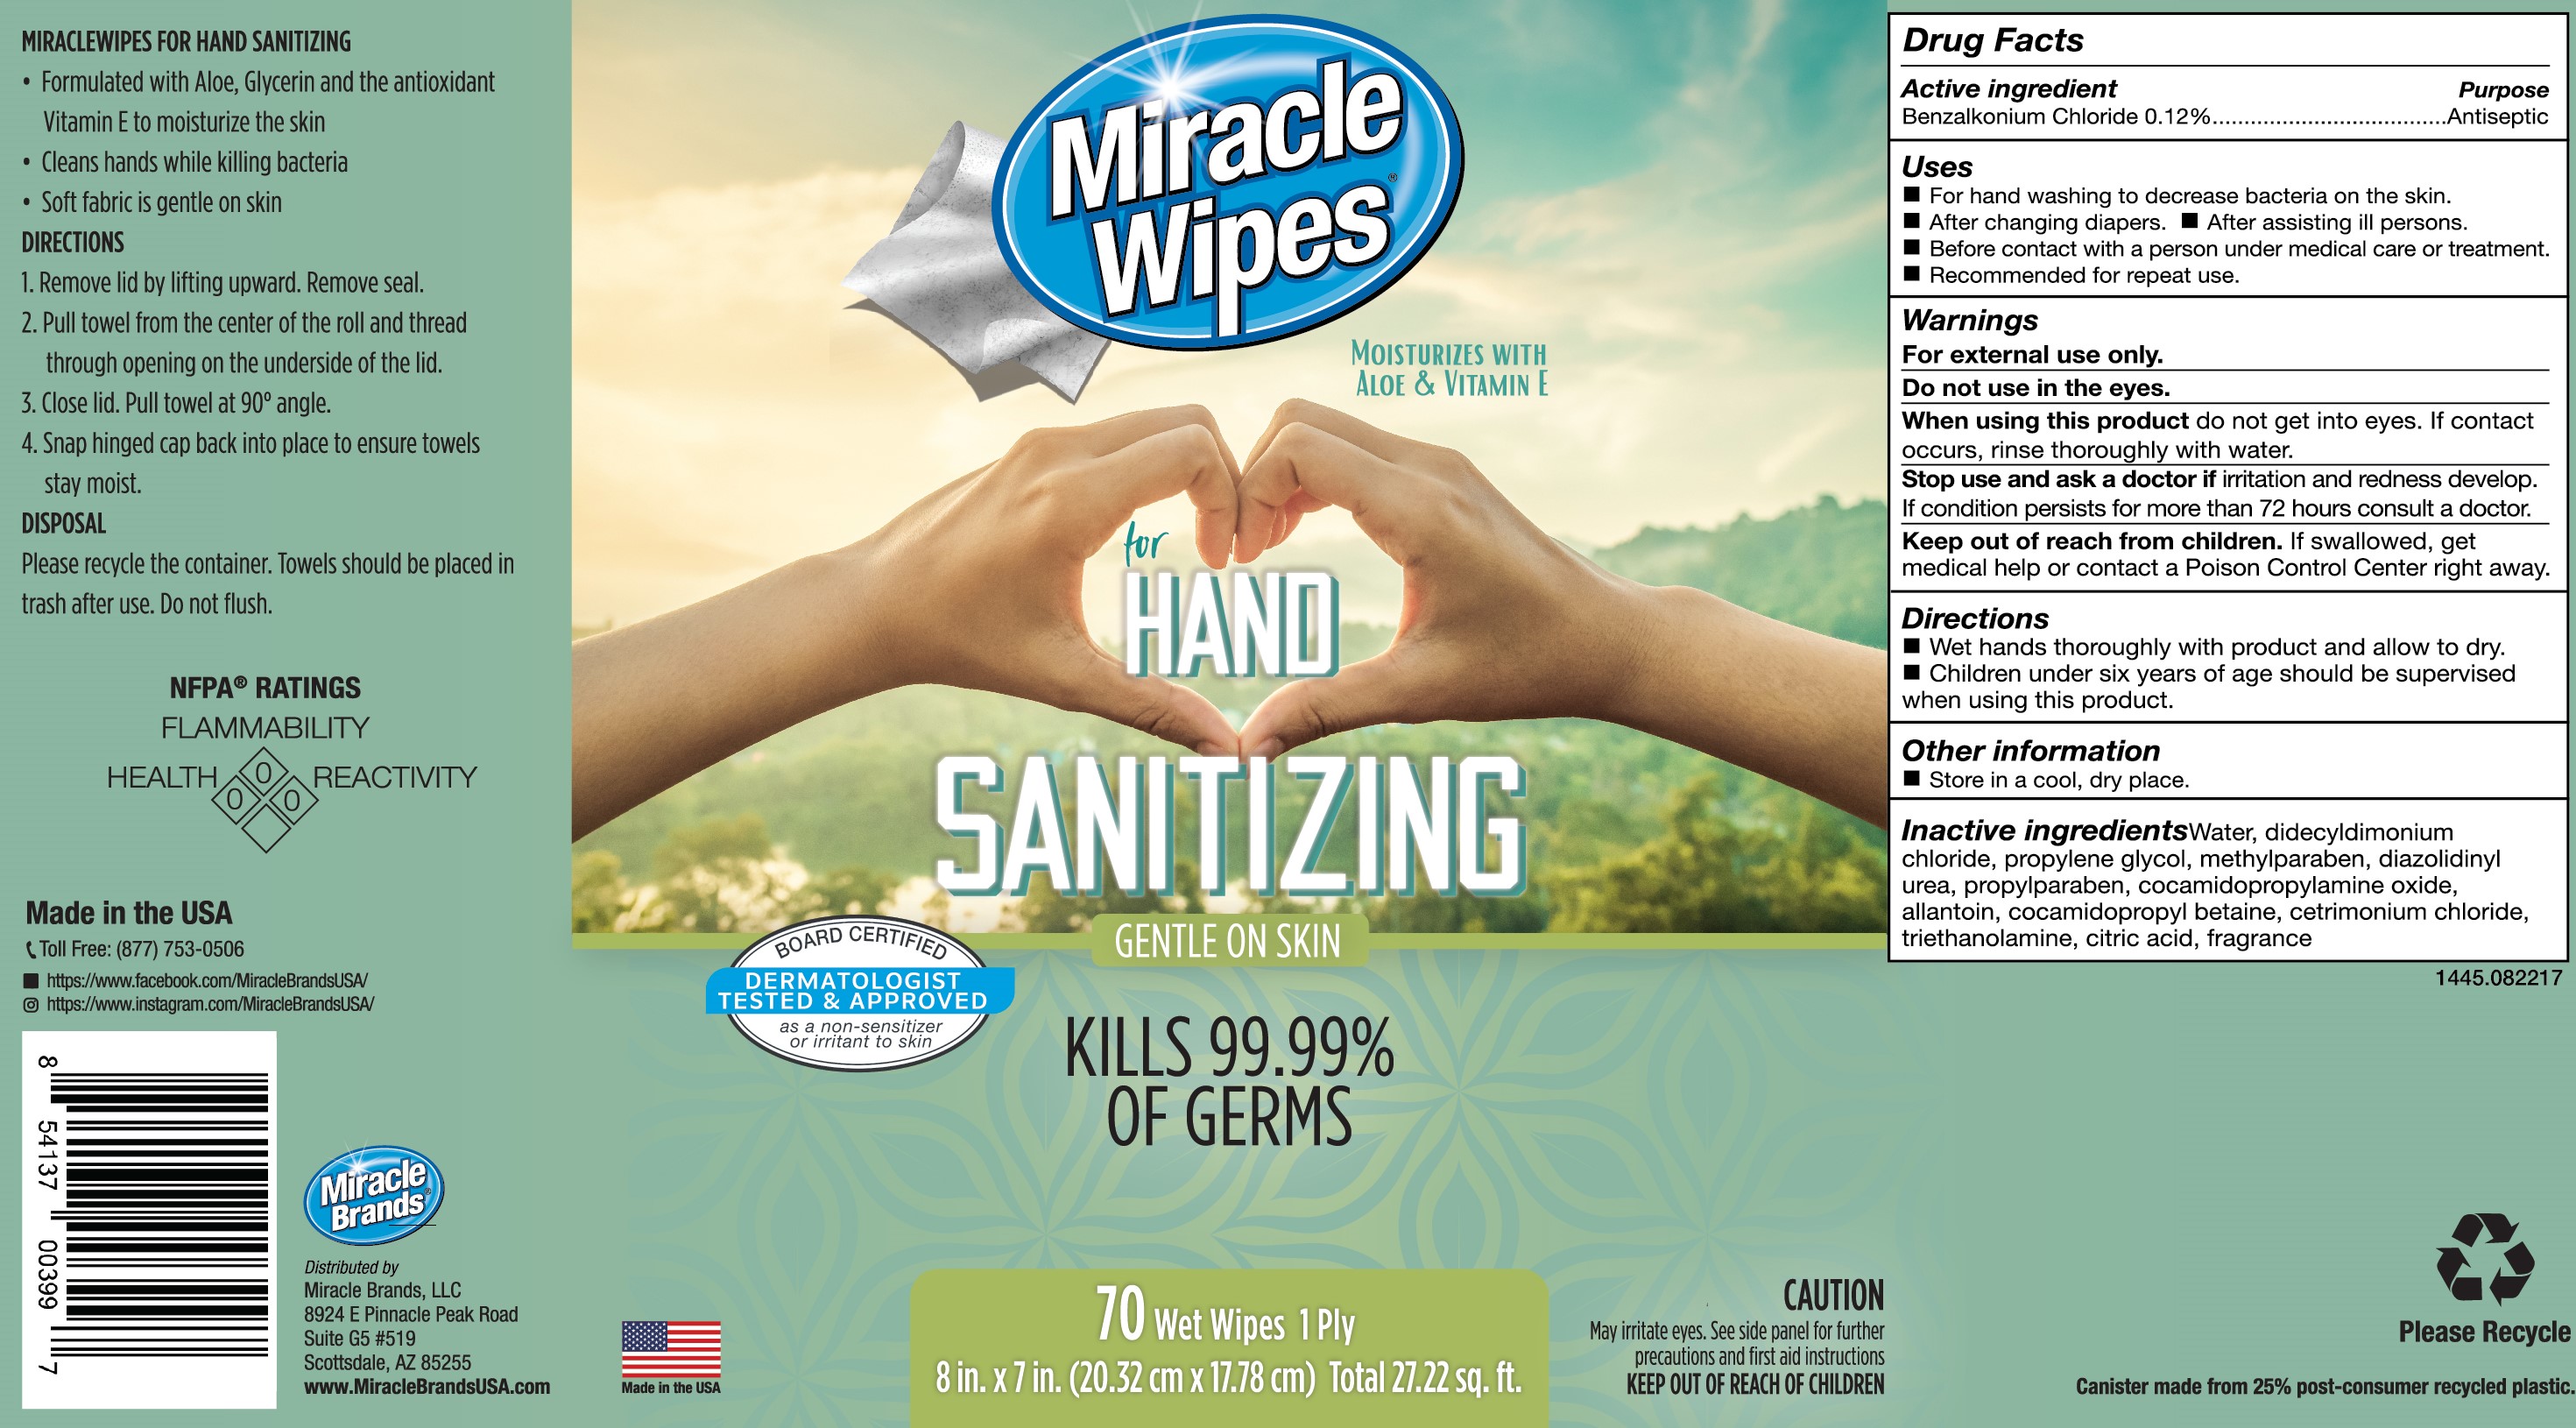 70 Wet Wipes 1 Ply NDC: <a href=/NDC/79779-002-70>79779-002-70</a>